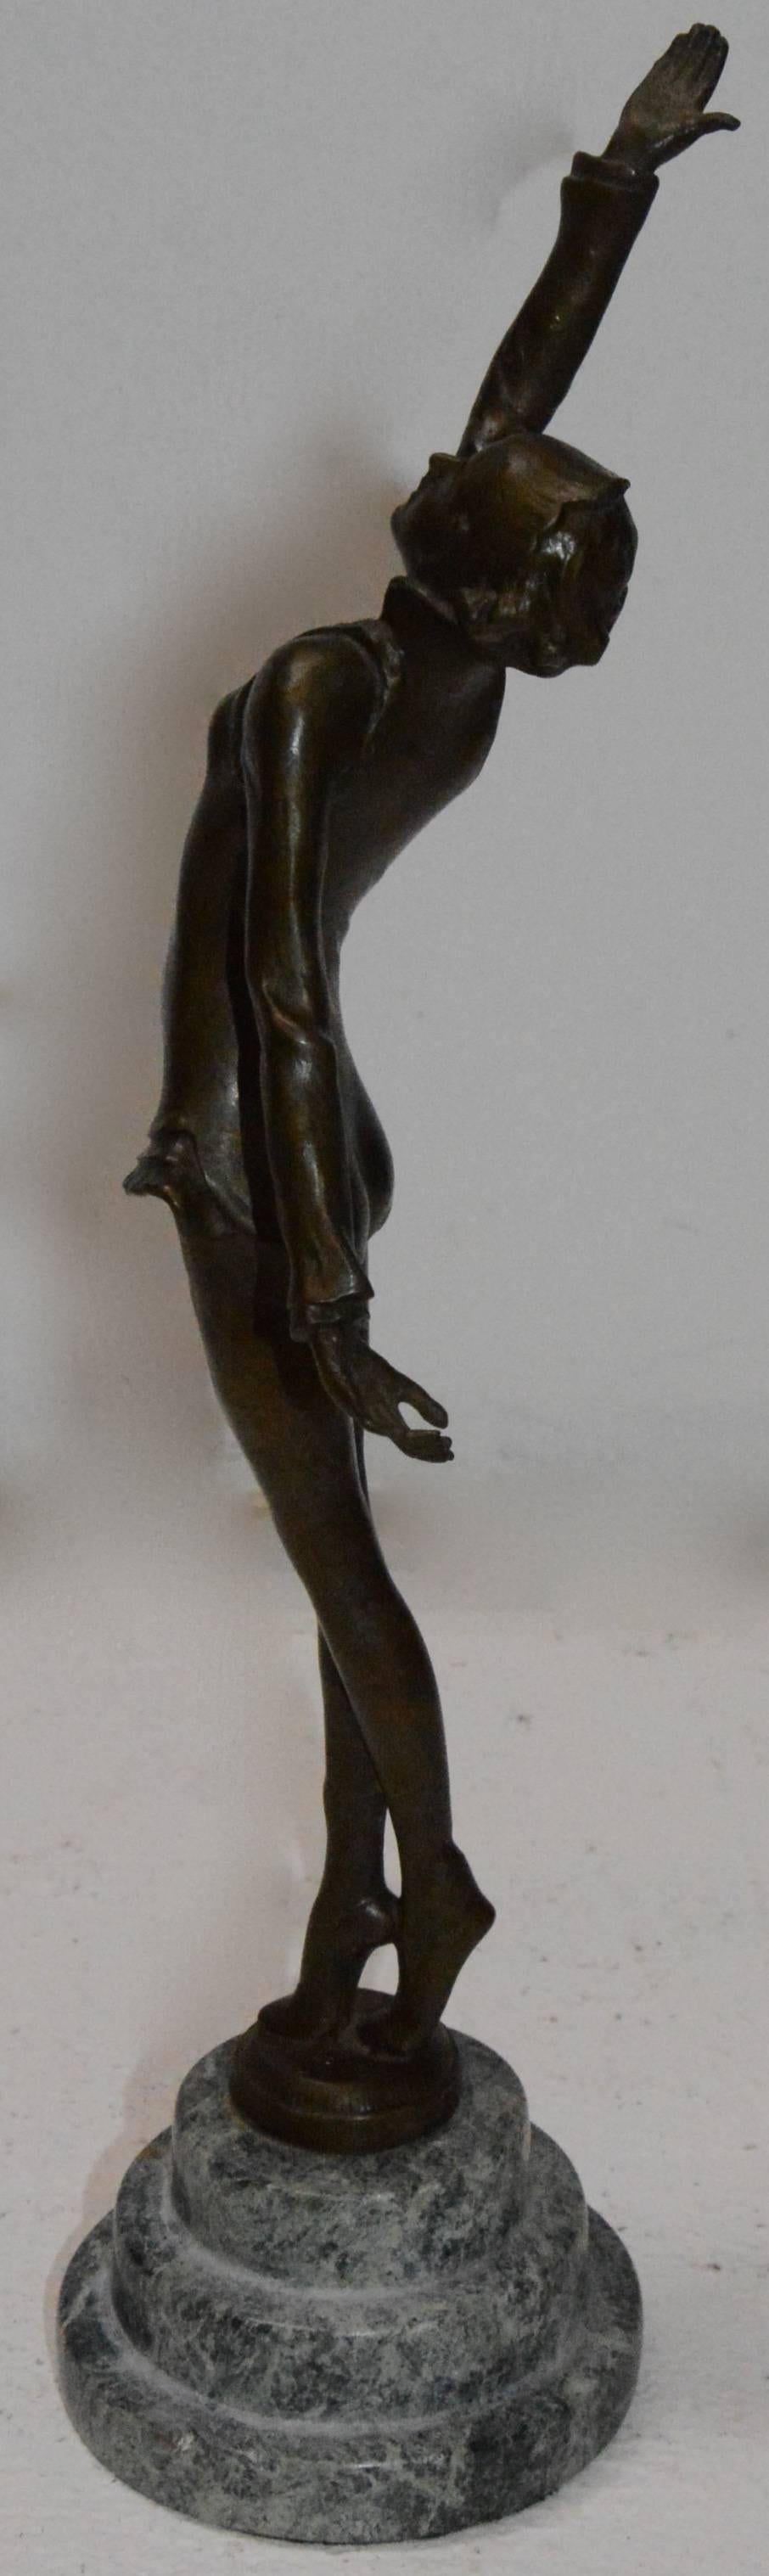 We are offering you a lovely bronze dancer posing atop a three tiered piece of green veined marble. She shows you her graceful pose with an up stretched right arm and her head held proudly.